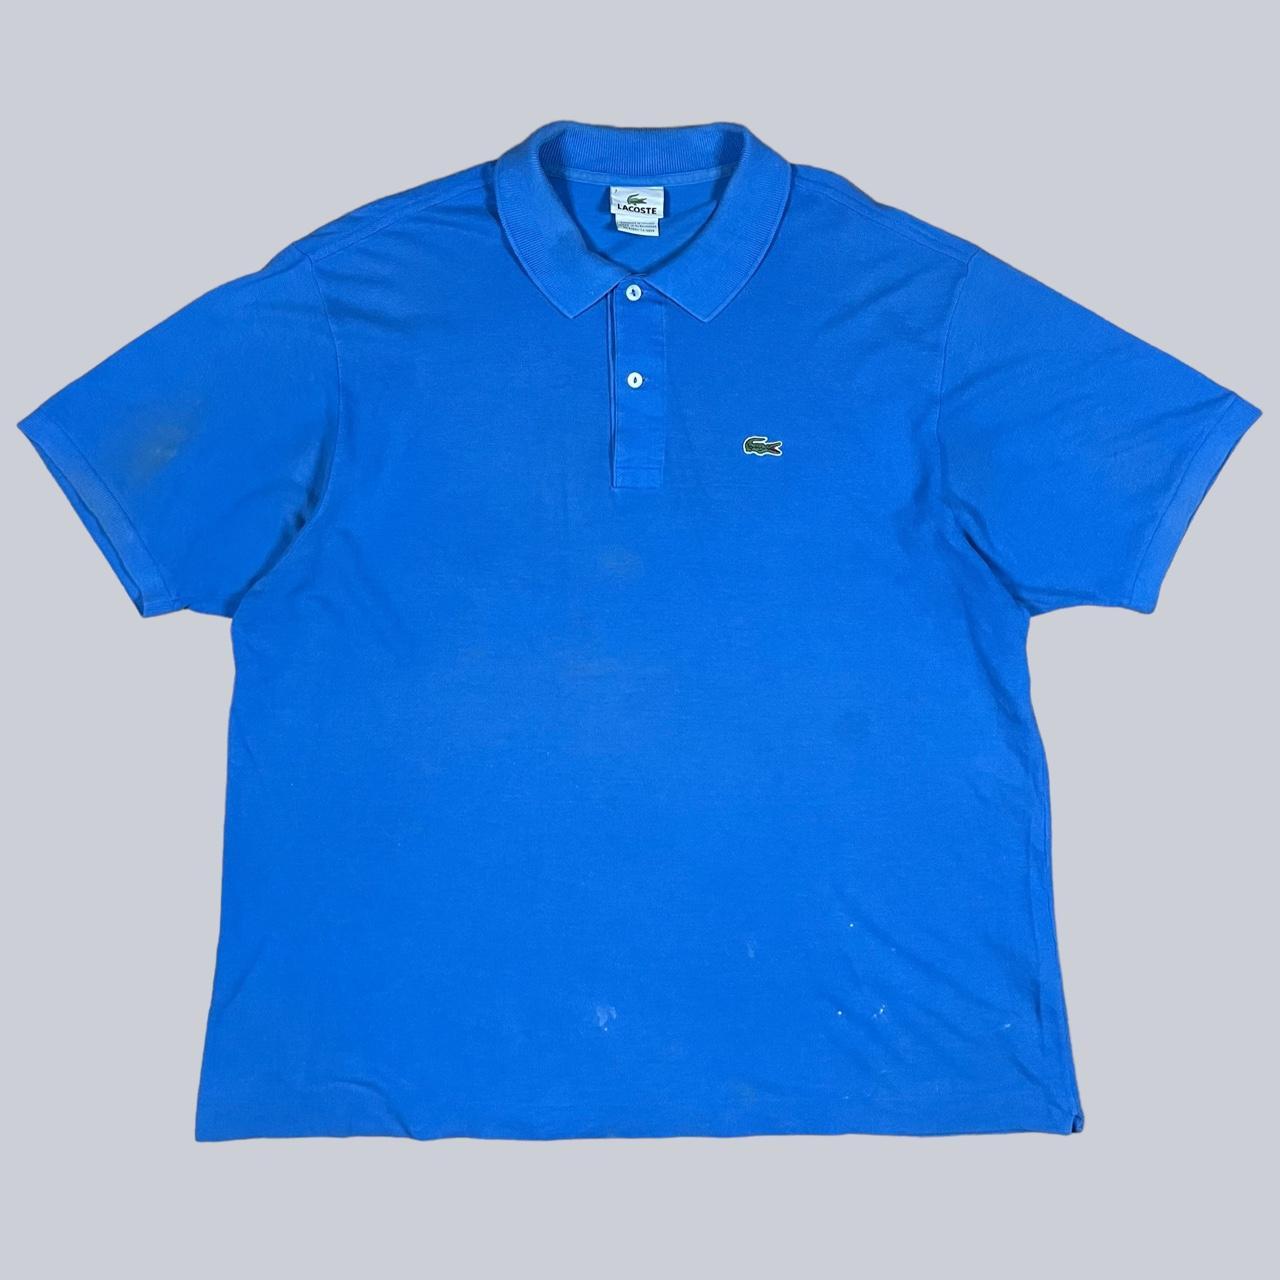 Lacoste Polo Shirt in blue Recommended Size Large... - Depop